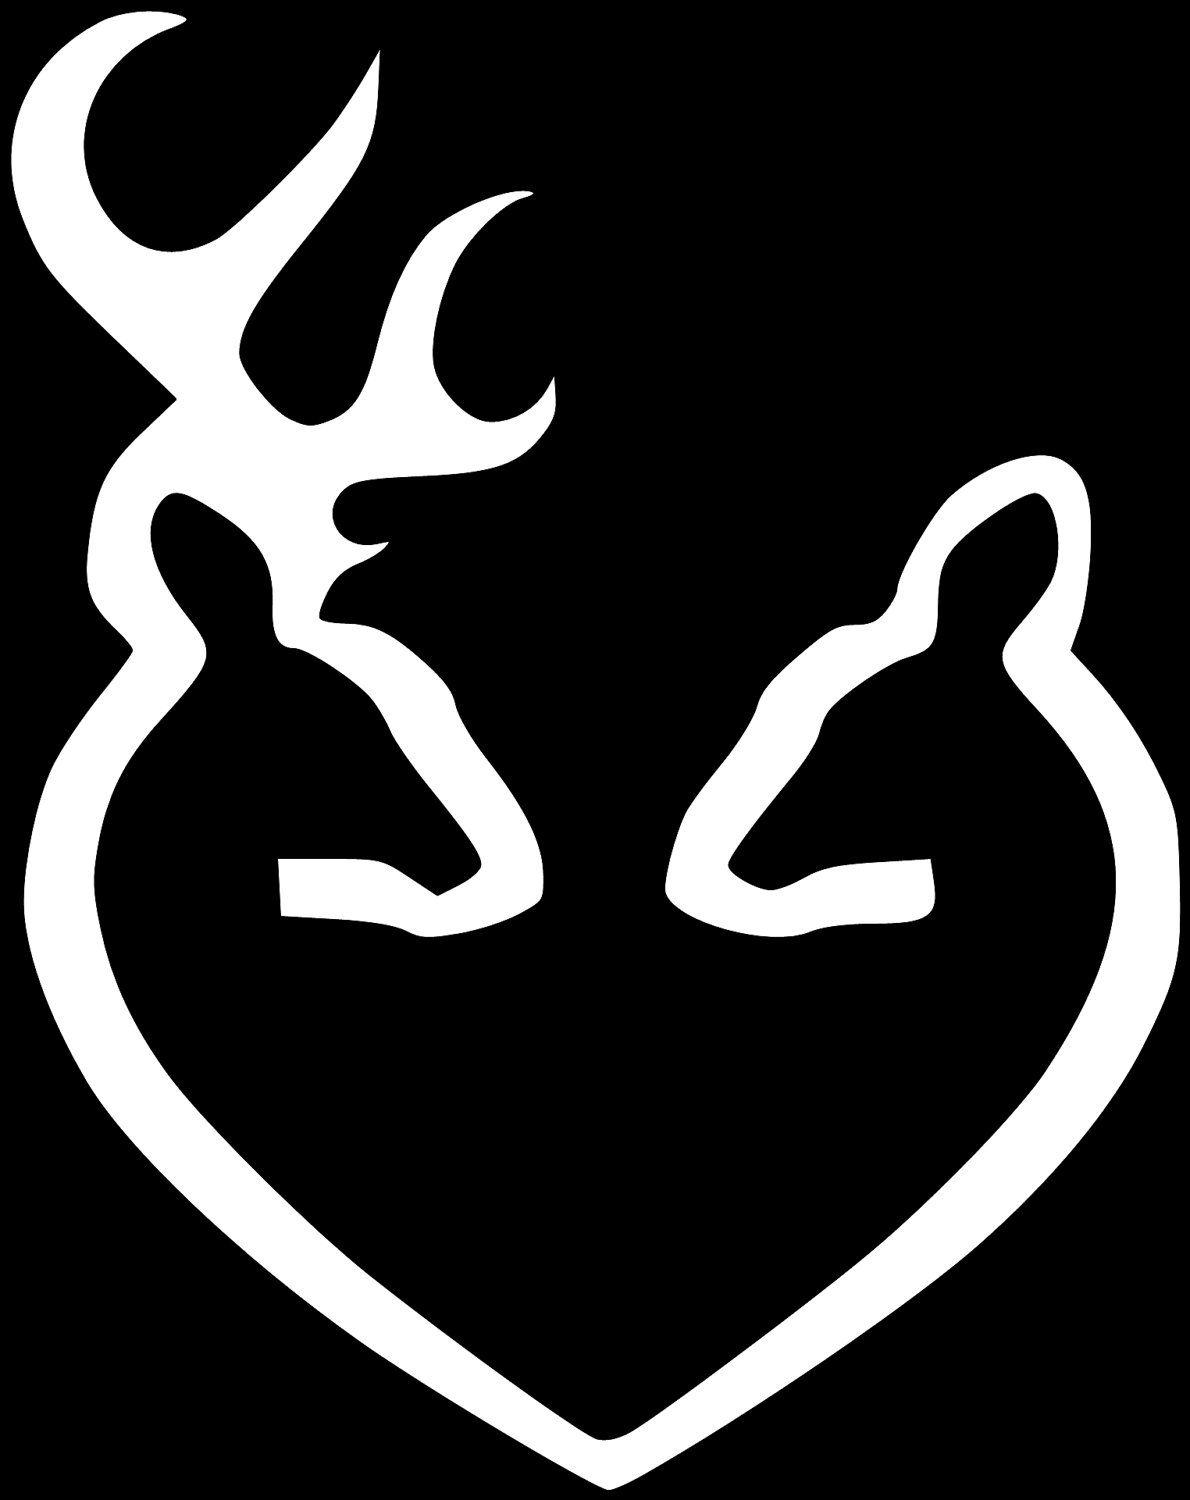 Cool Browning Logo - Free Browning Deer Logo Pictures, Download Free Clip Art, Free Clip ...